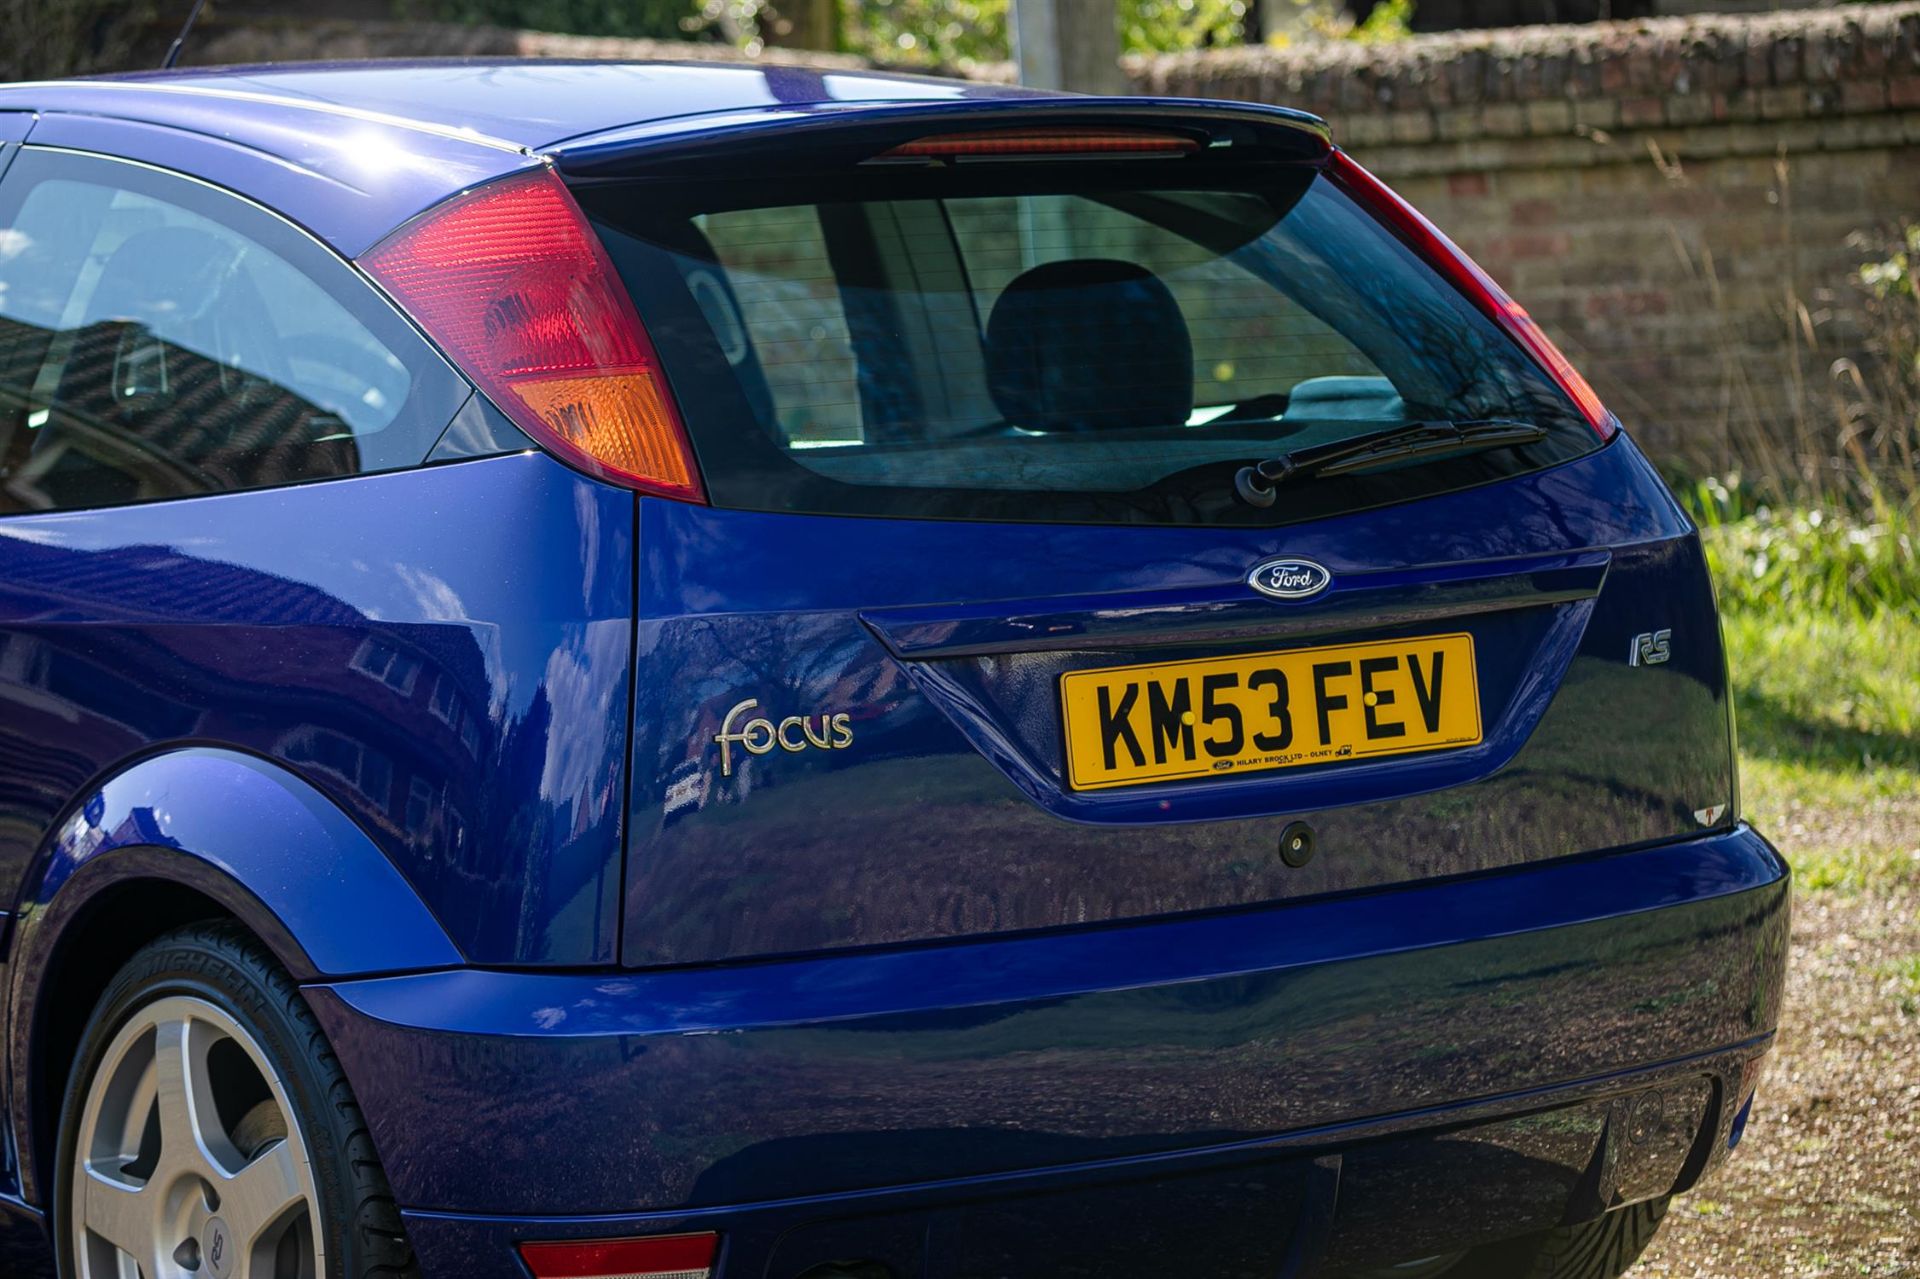 2003 Ford Focus RS Mk1 - 3265 Miles - Image 9 of 10